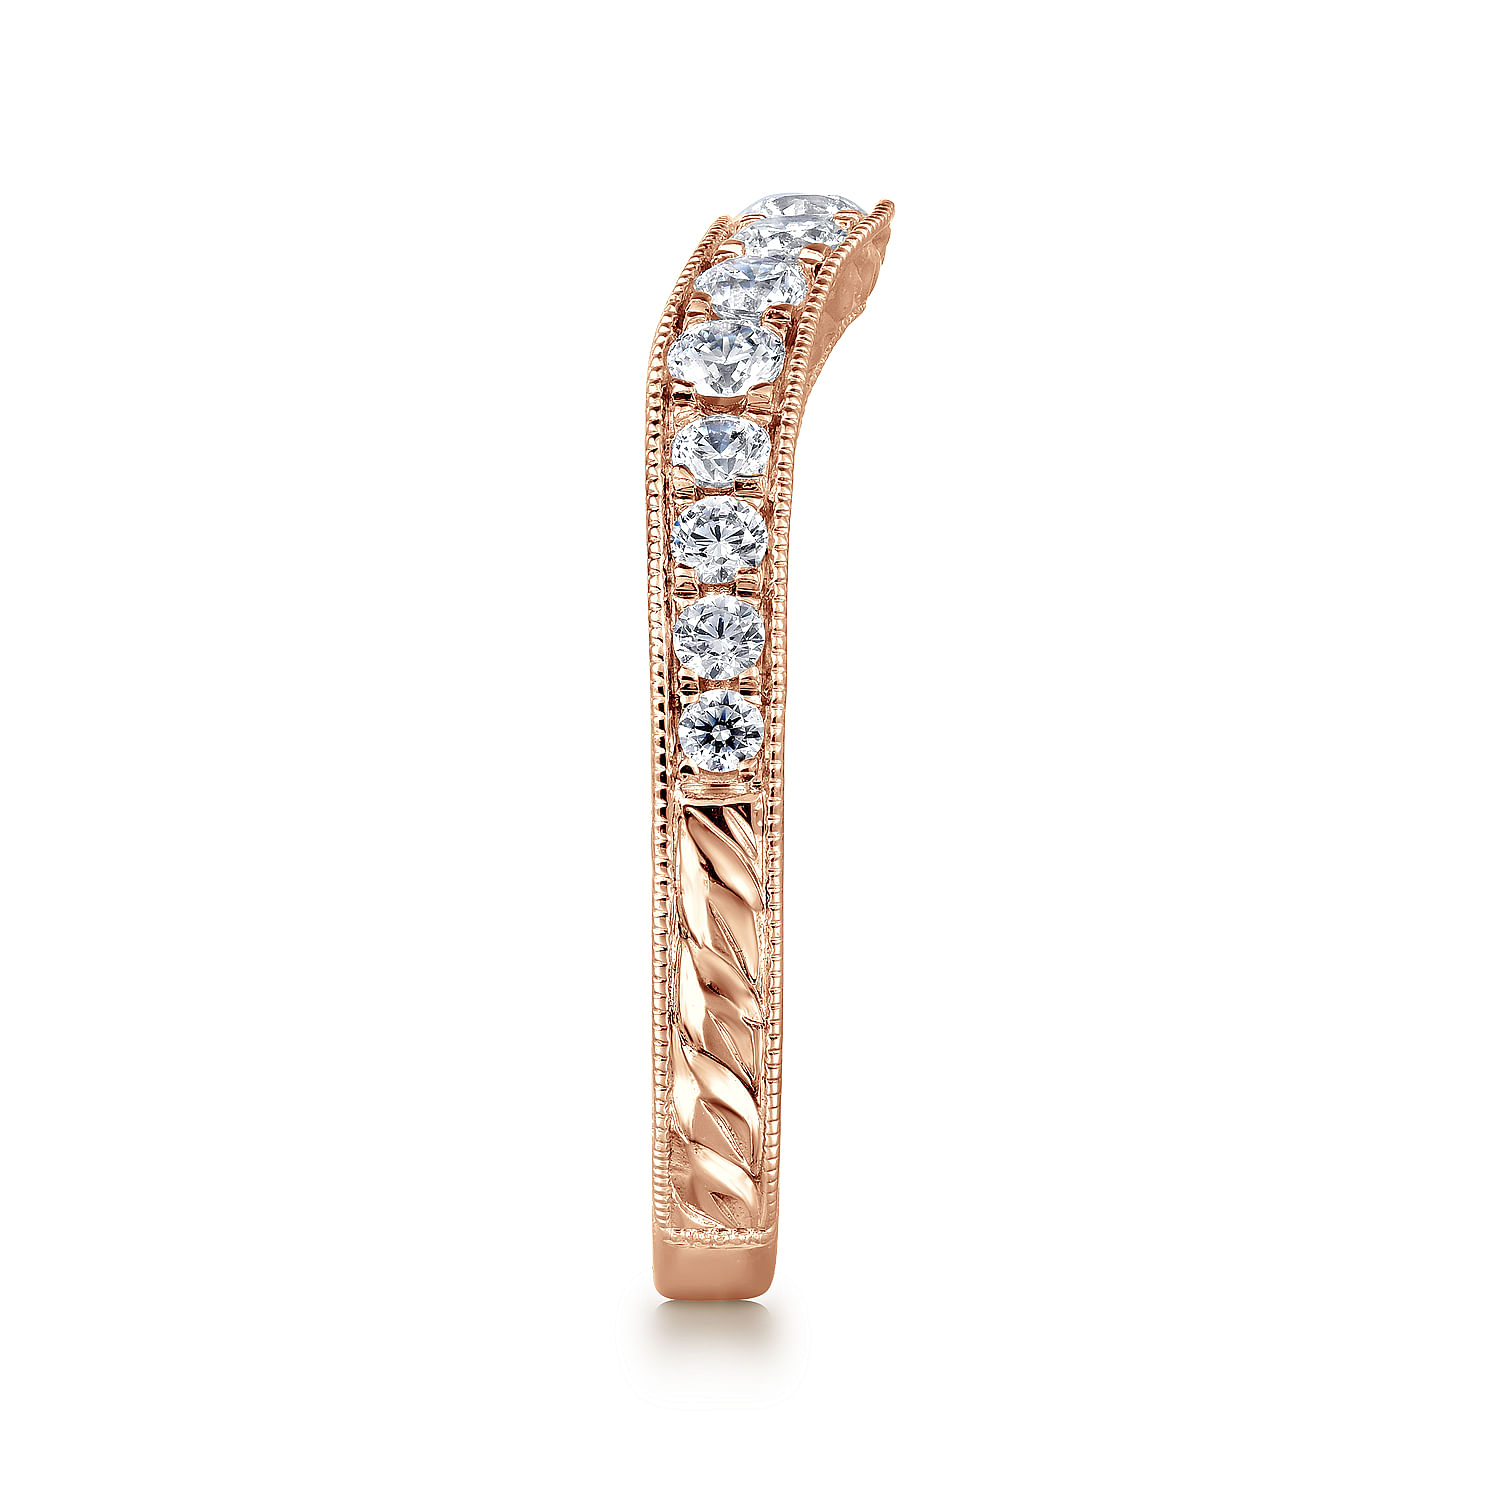 Vintage Inspired 14K Rose Gold Curved Channel Set Diamond Wedding Band with Engraving